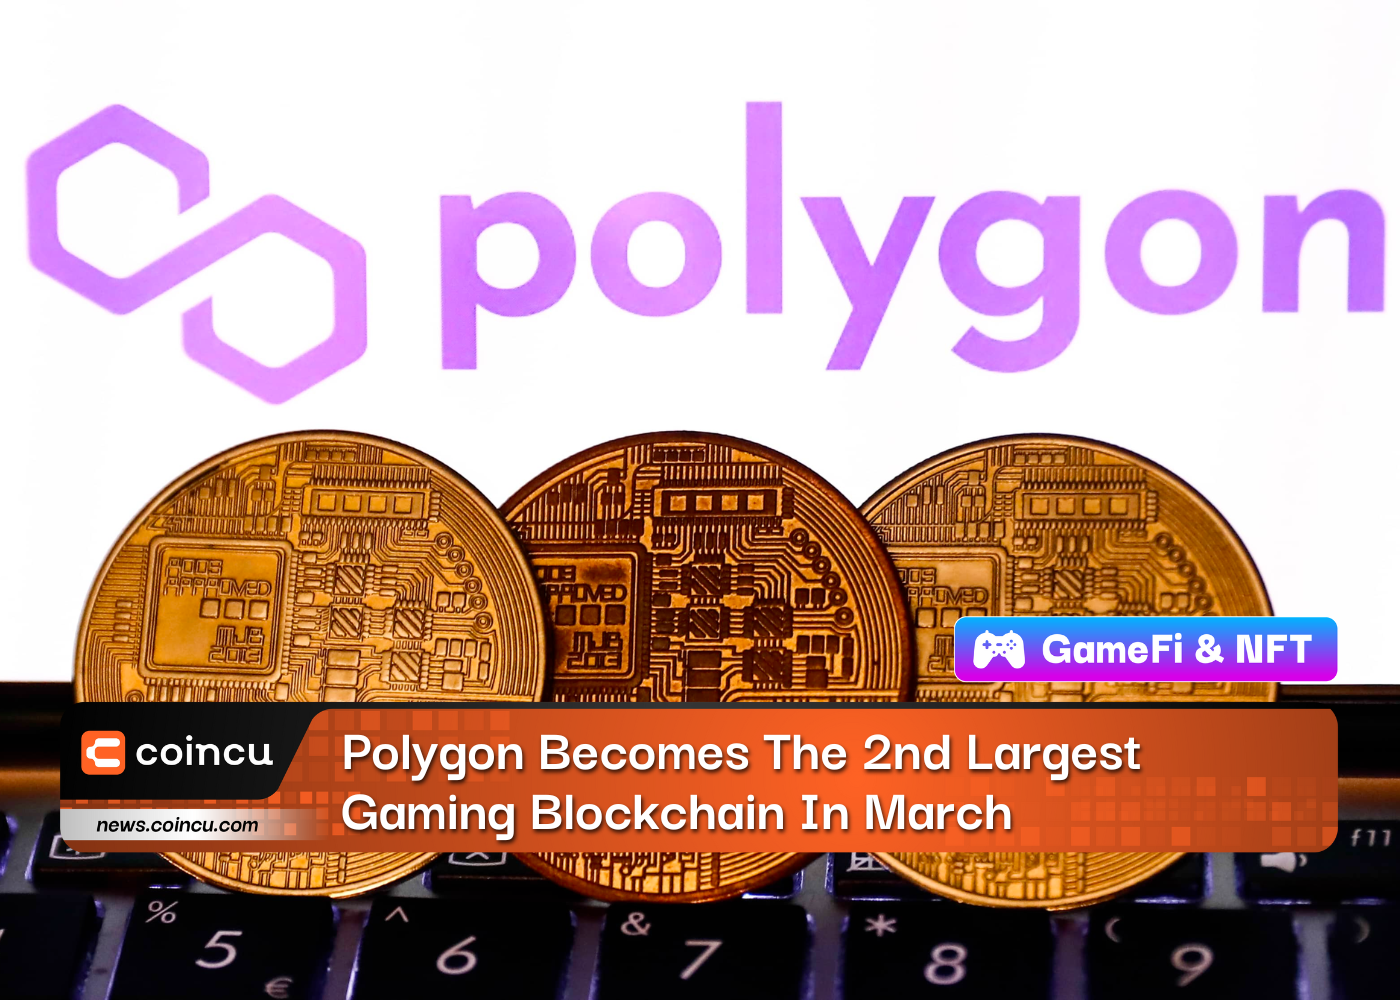 Polygon Becomes The 2nd Largest Gaming Blockchain In March